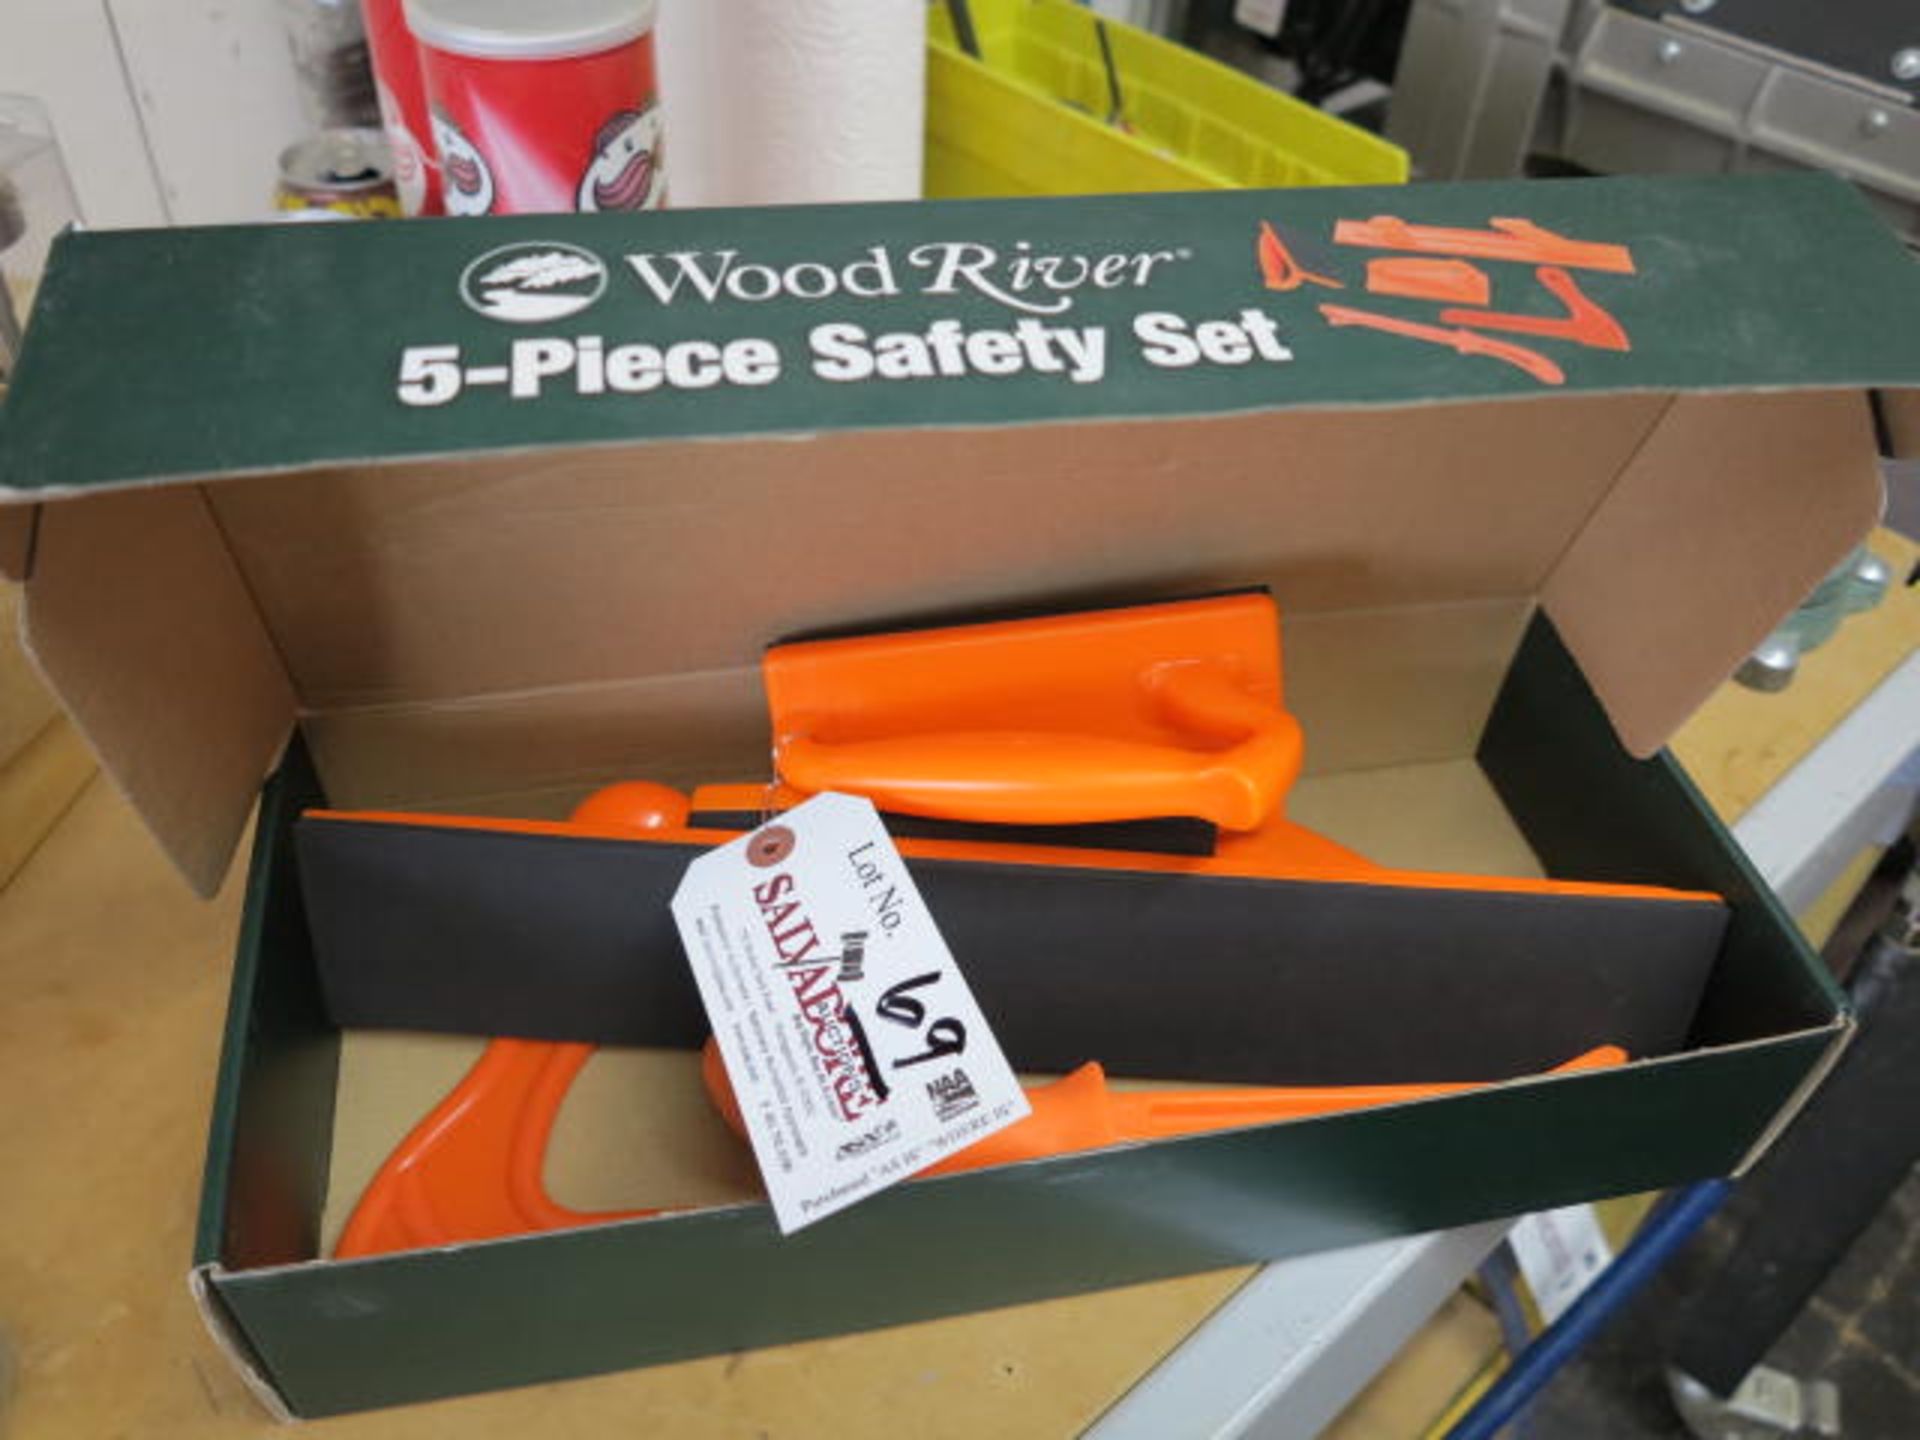 Wood River 5 Piece Safety Set Located at 530 Wellington Ave. Suite 32, Cranston, RI